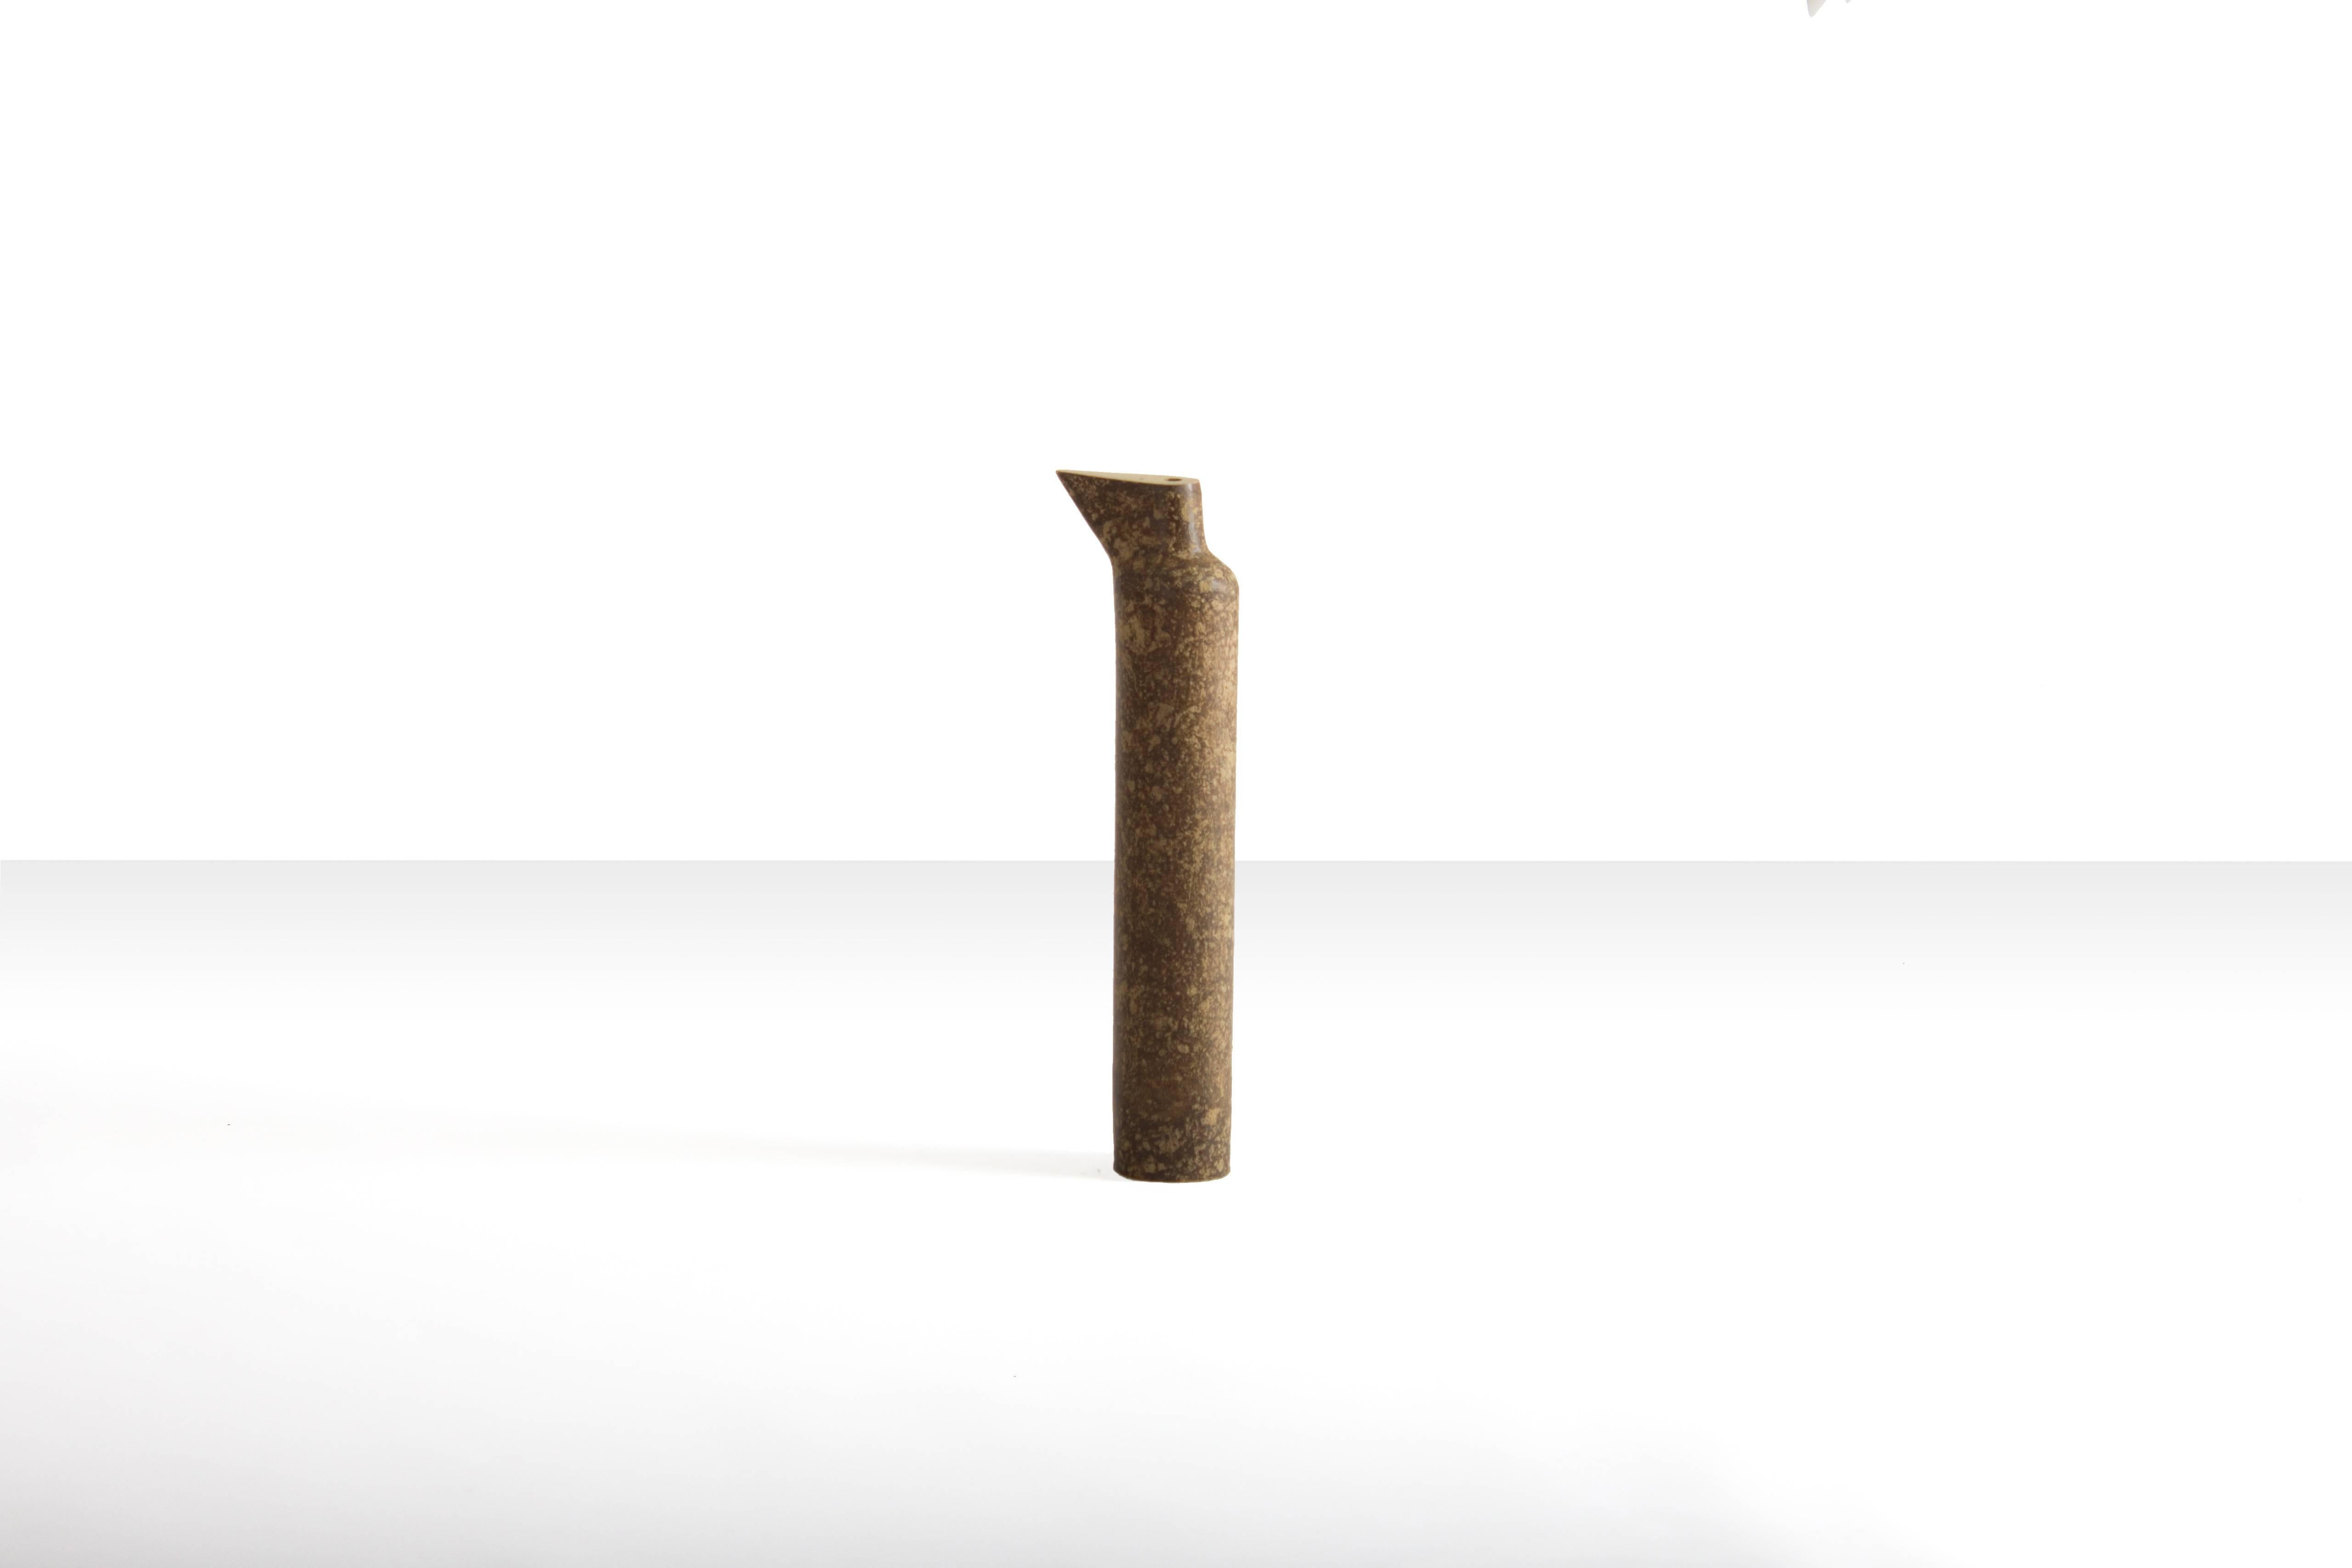 This small “Anfora” vase by contemporary Brazilian artist Domingos Tótora is a prime examples of the artist’s ars poetica: “I’m a mix of artist, designer, and craftsman.” Additionally, the environmentally conscious artist creates his sculptural